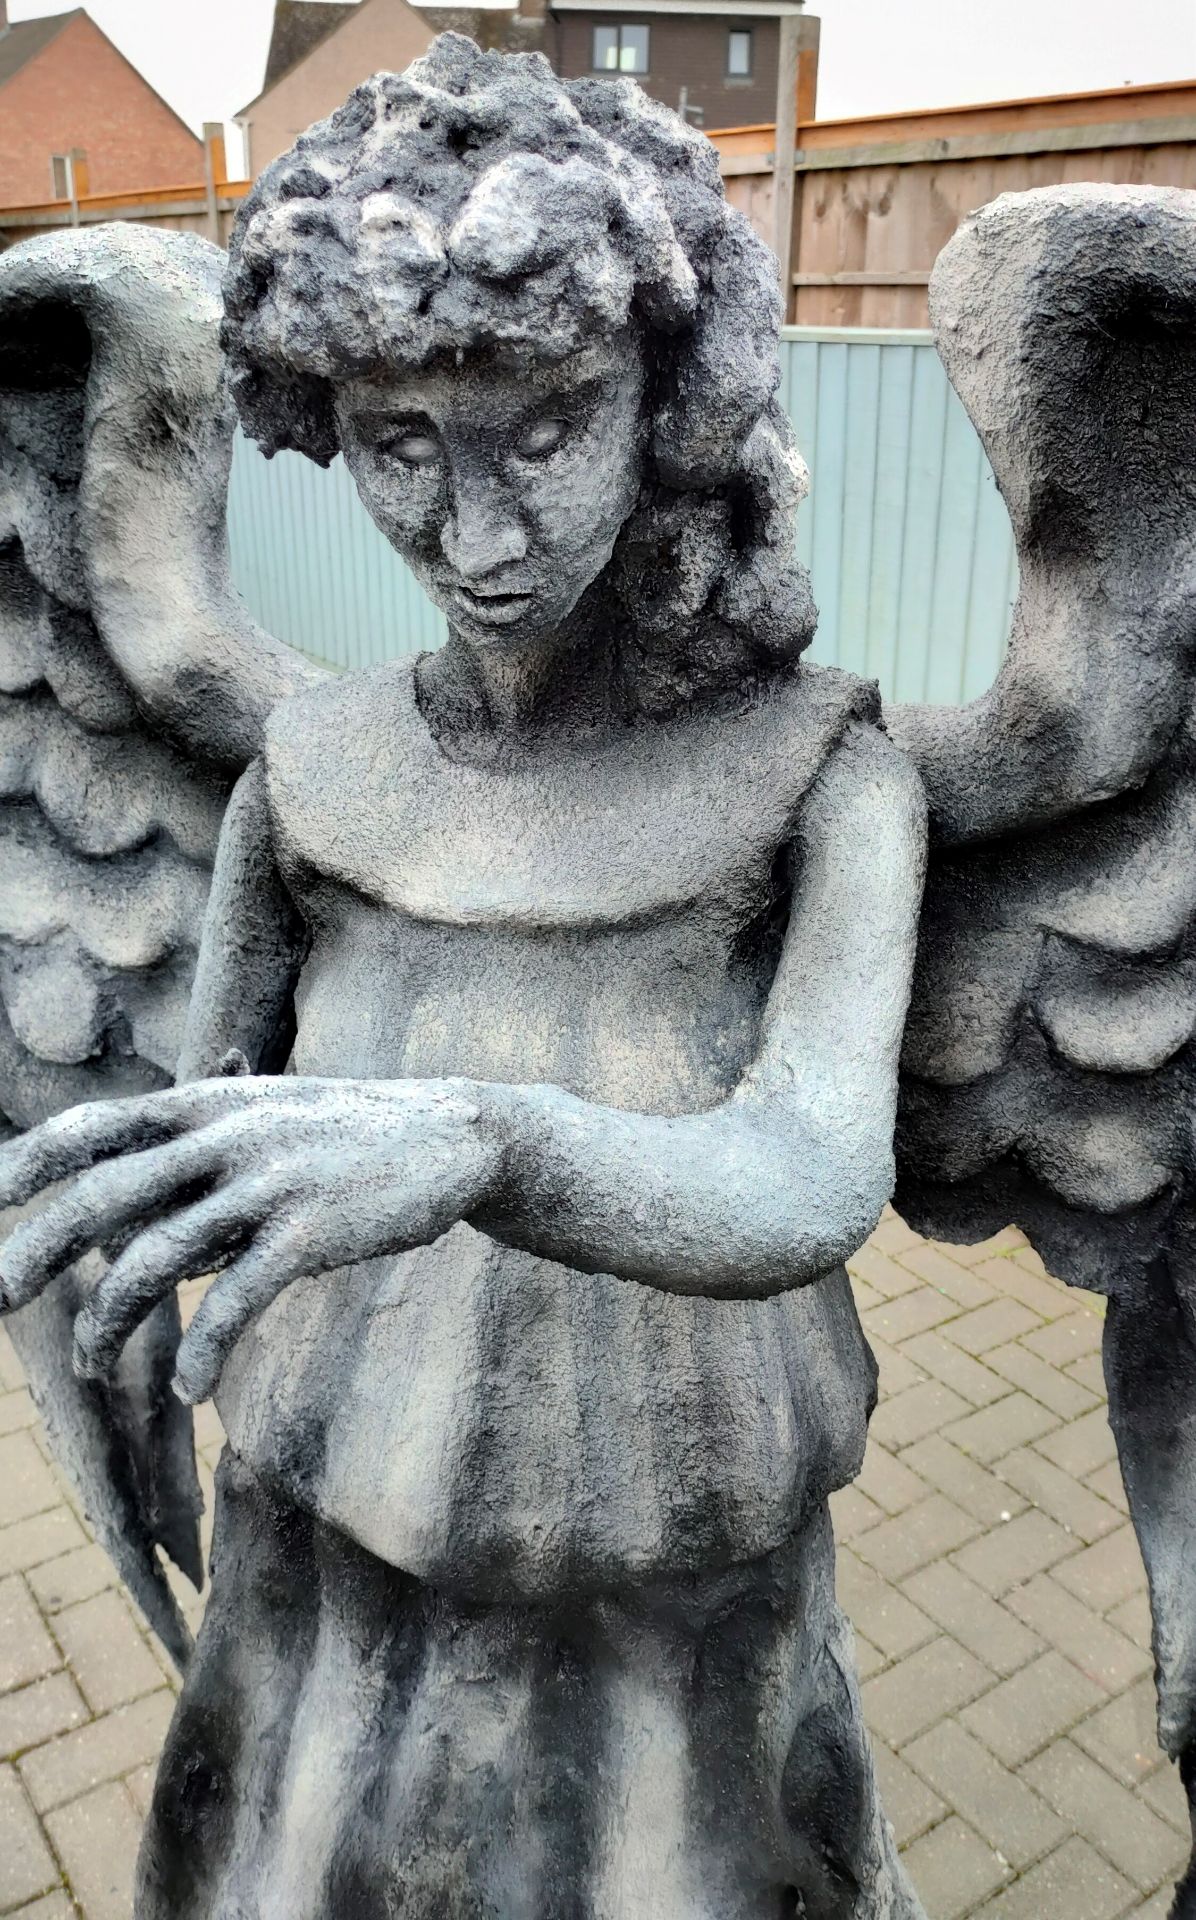 DOCTOR WHO - LIFESIZE PROP REPLICA WEEPING ANGEL STATUE - Image 12 of 15